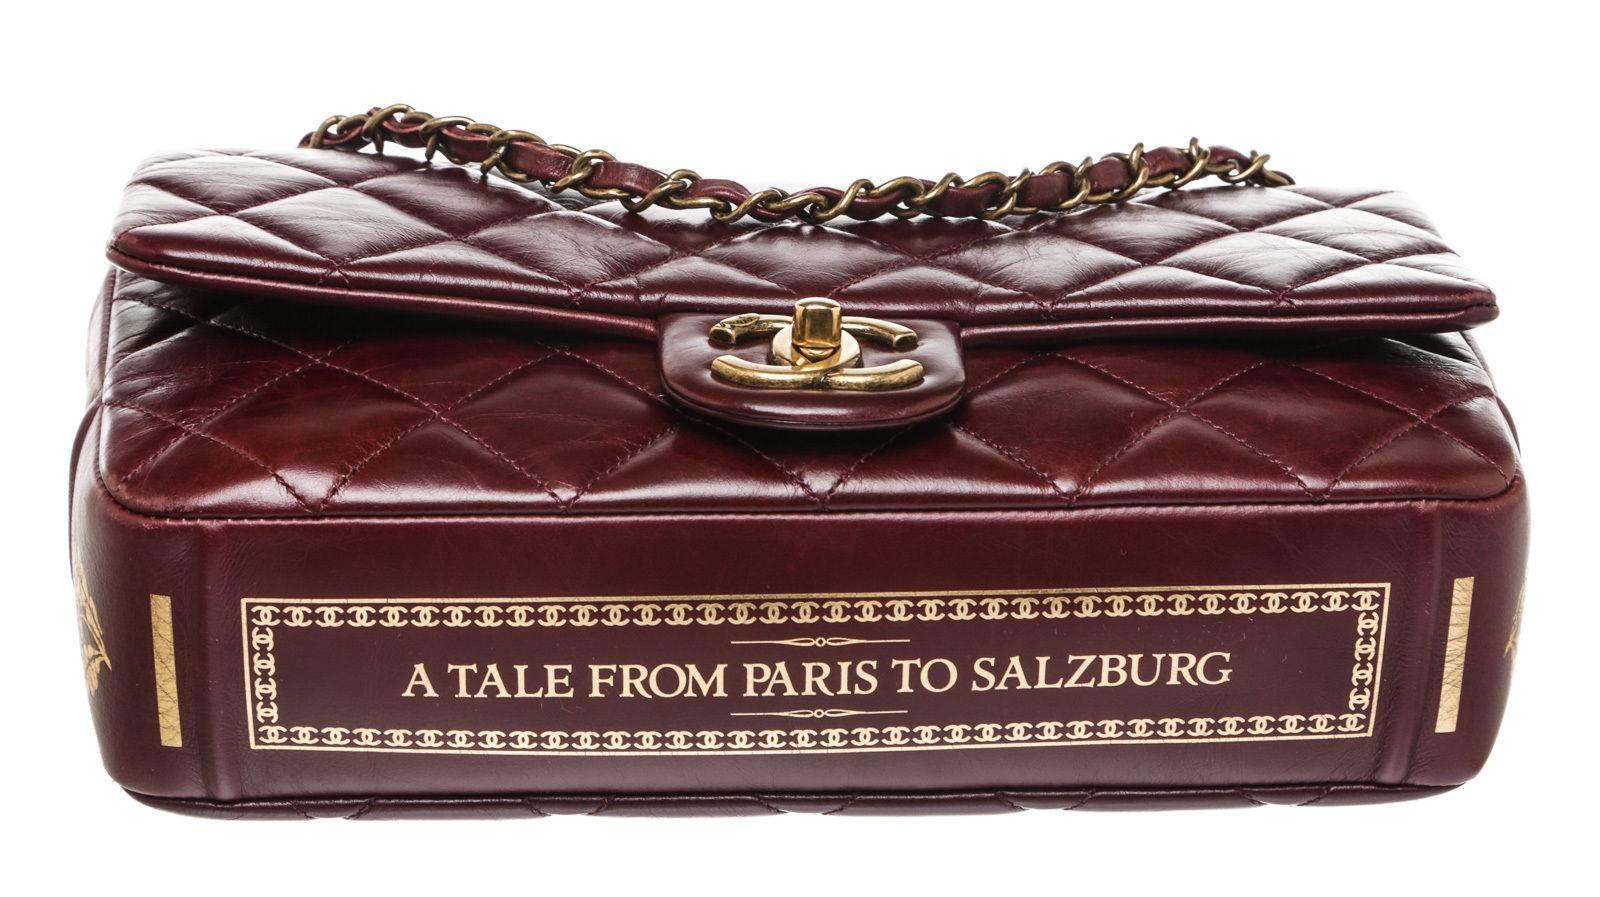 Chanel Burgundy Leather Paris-Salzburg Collection Classic Flap Handbag In Good Condition For Sale In Corona Del Mar, CA